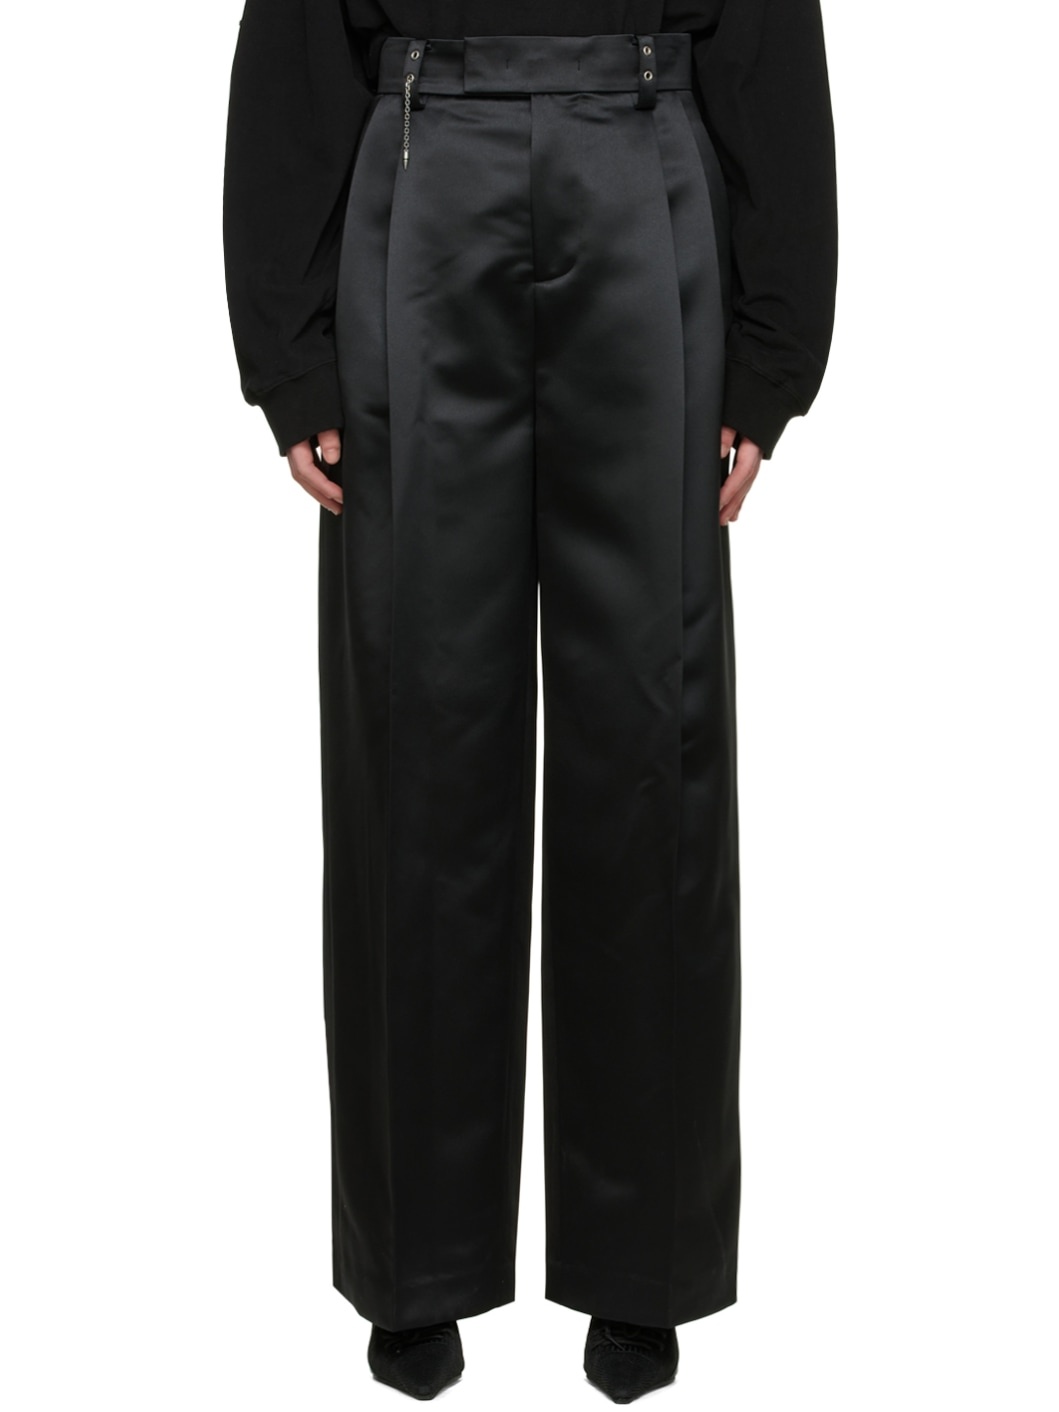 Black Polyester Trousers - 1